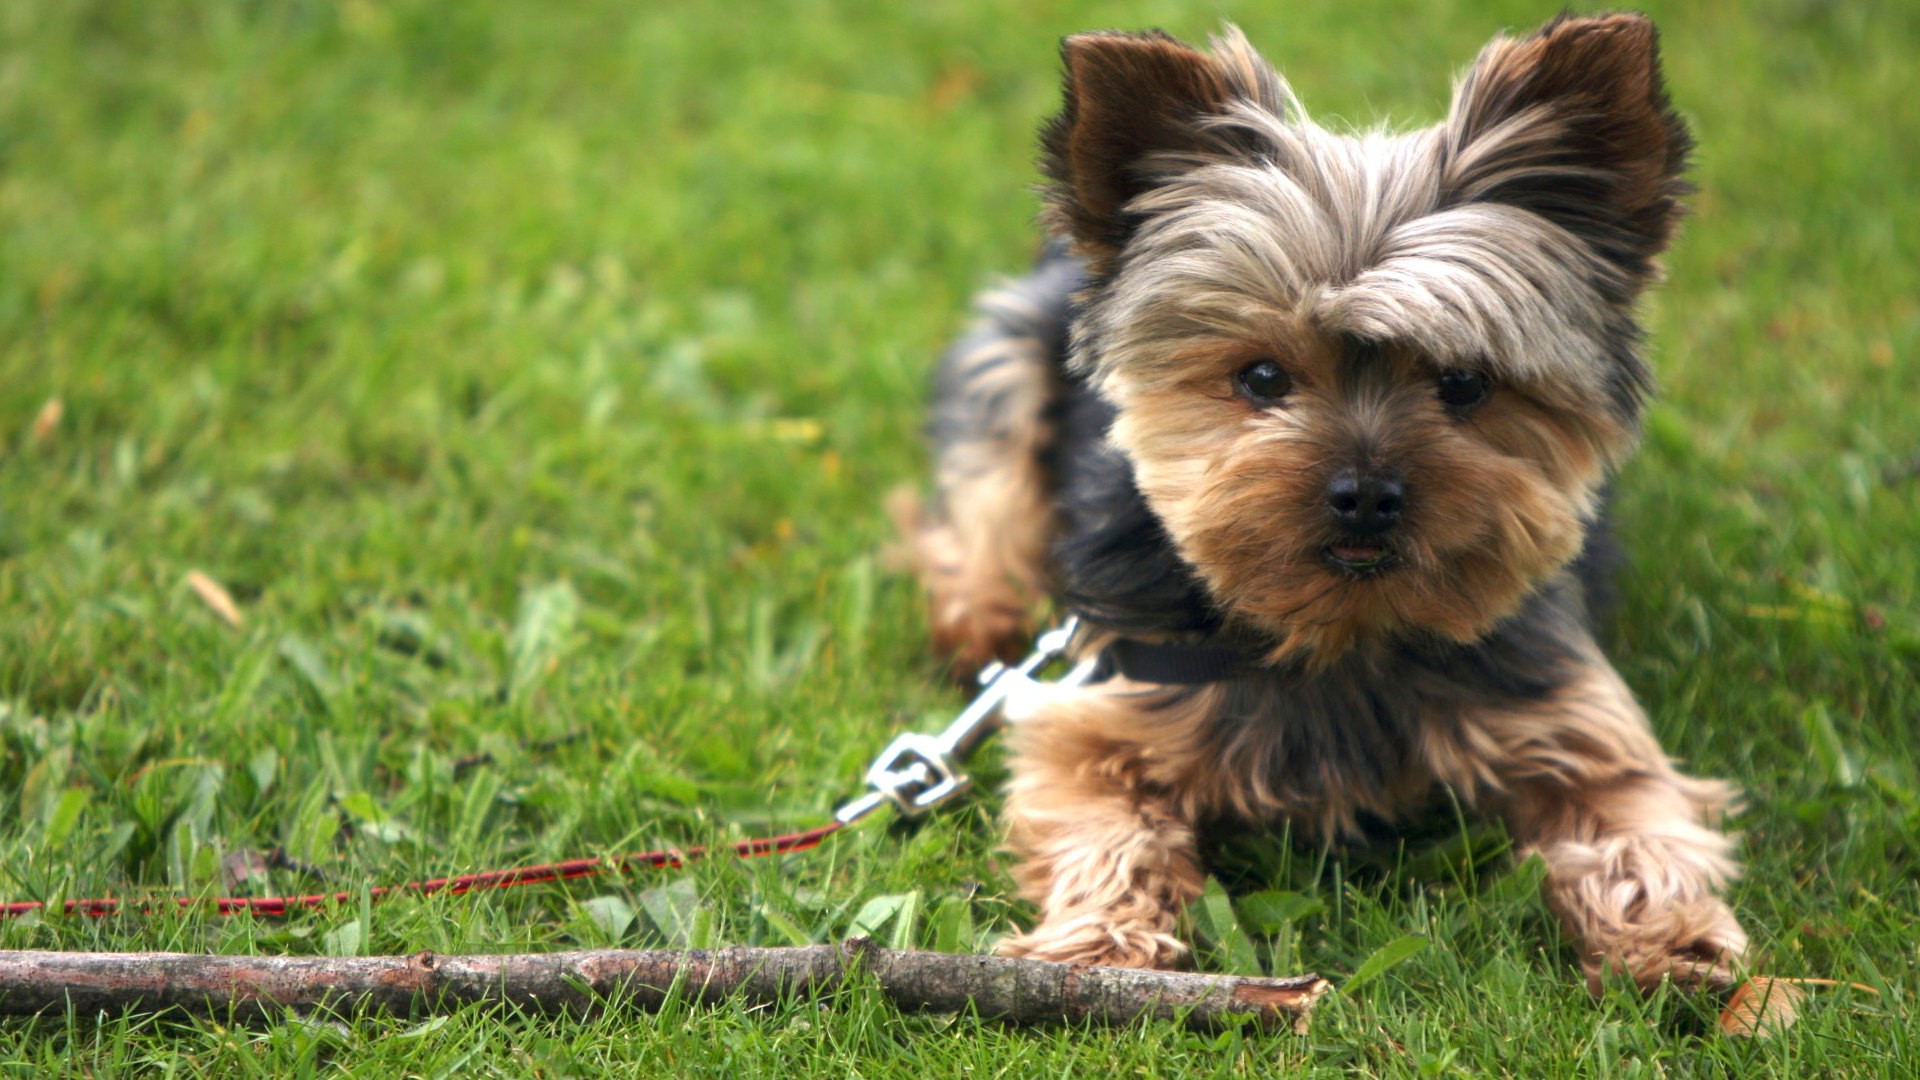 A Yorkshire Terrier lying on the grass behind a piece of stick